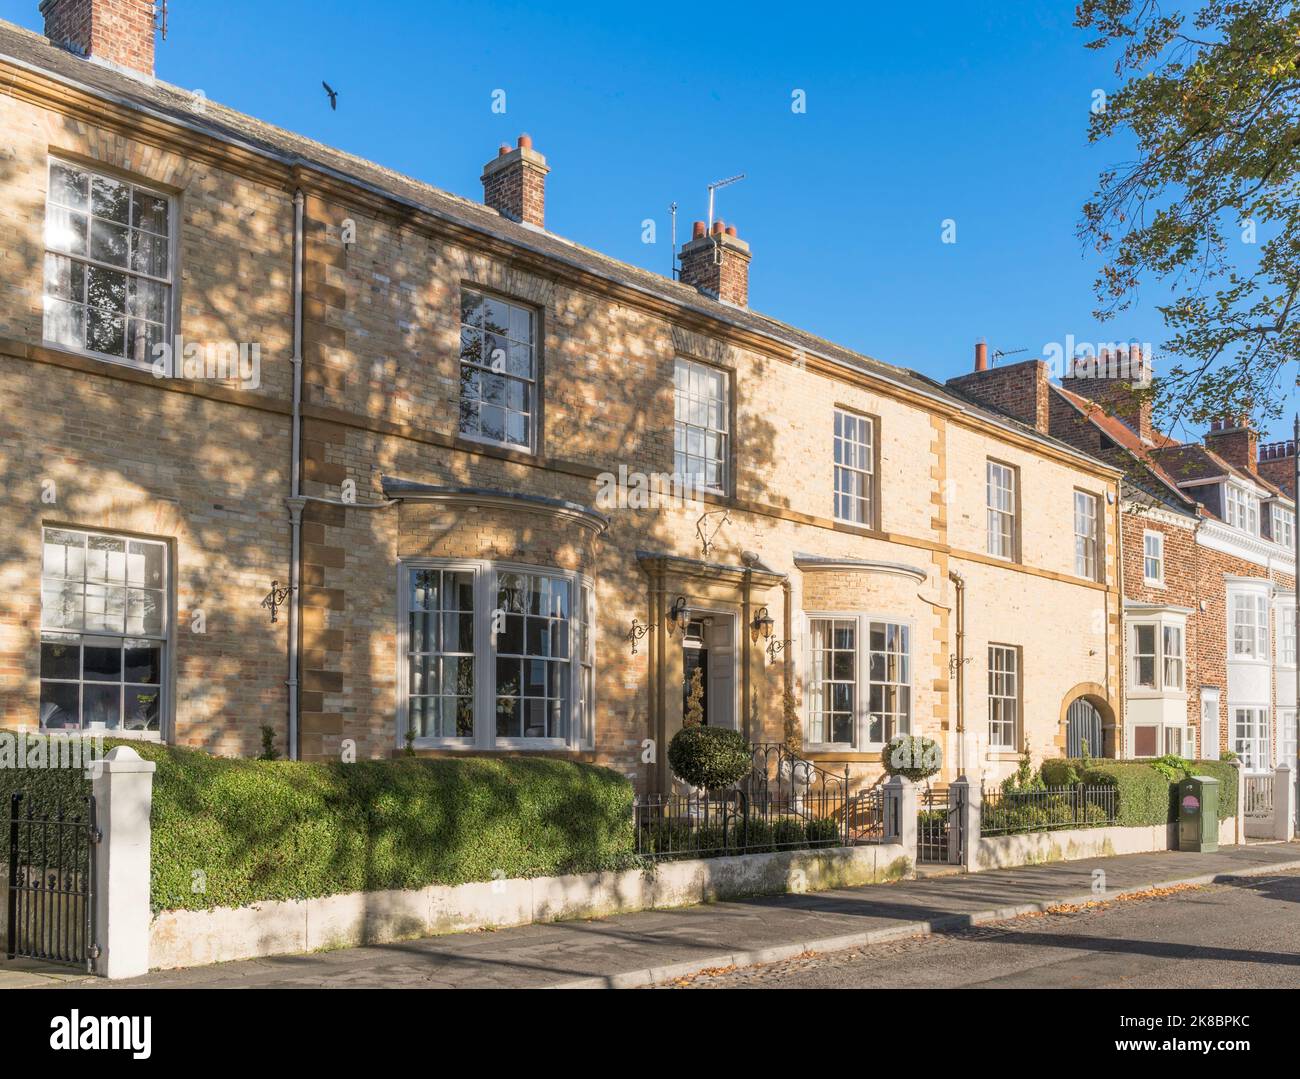 The Listed Stokesley House, 2 West Green, Stokesley North Yorkshire, England, Stockfoto